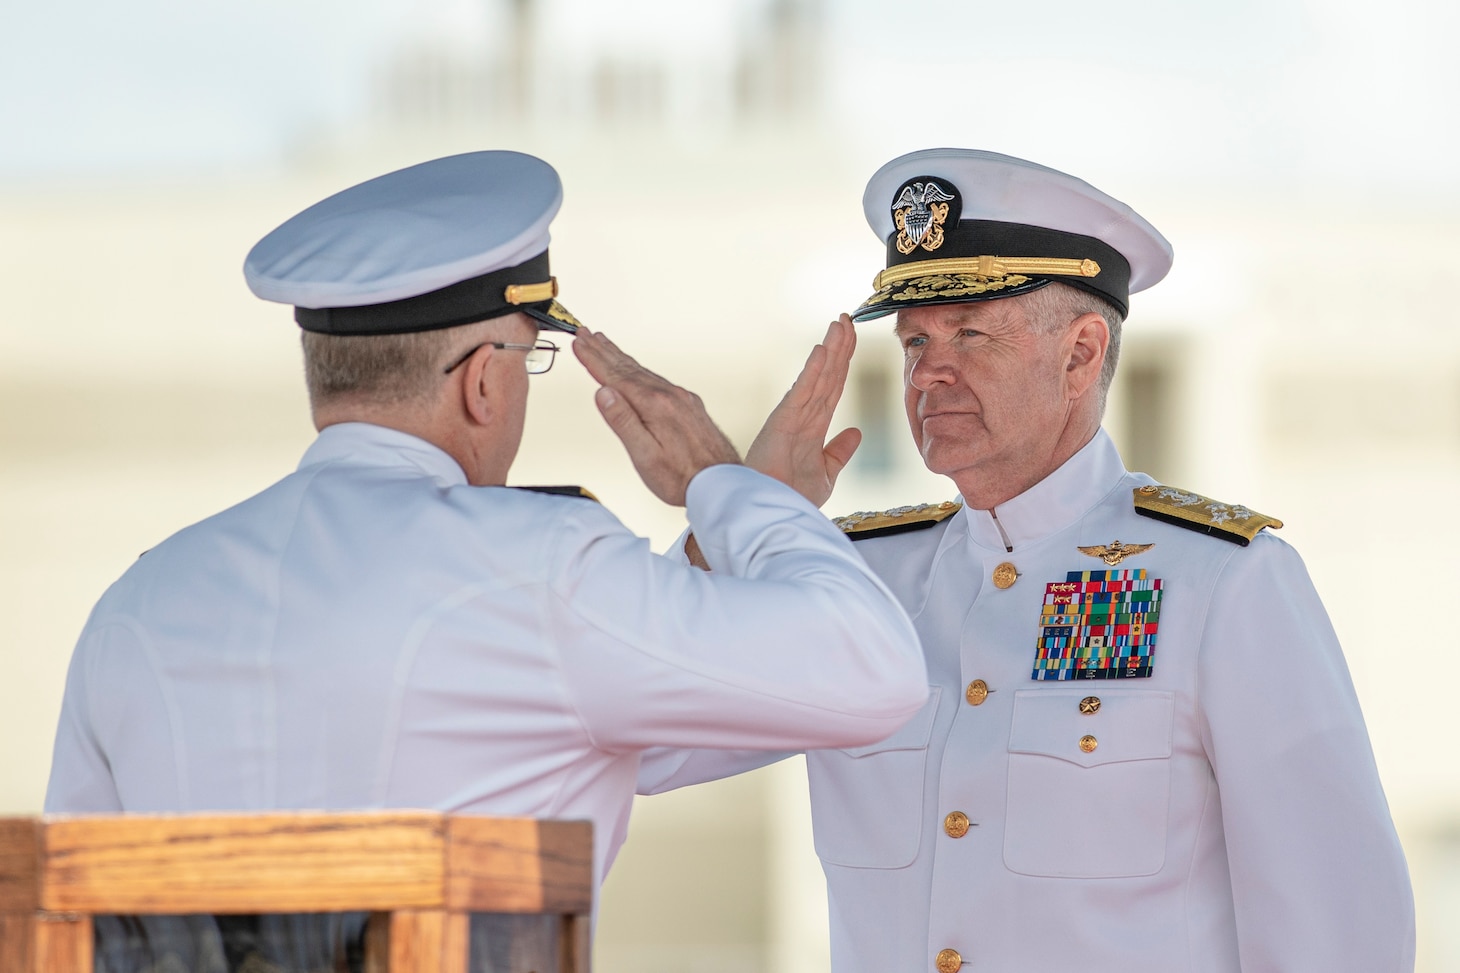 PEARL HARBOR (June 15, 2023) Adm. Samuel Paparo, commander, U.S. Pacific Fleet, right, receives report of relief from Rear Adm. Rick Seif, incoming commander, Submarine Force, U.S. Pacific Fleet (COMSUBPAC), during the COMSUBPAC change of command ceremony aboard the Virginia-class fast-attack submarine USS Missouri (SSN 780), June 15, 2023. Rear Adm. Rick Seif relieved Rear Adm. Jeff Jablon in a ceremony held on the waterfront. (U.S. Navy photo by Mass Communication Specialist 1st Class Chris Williamson)